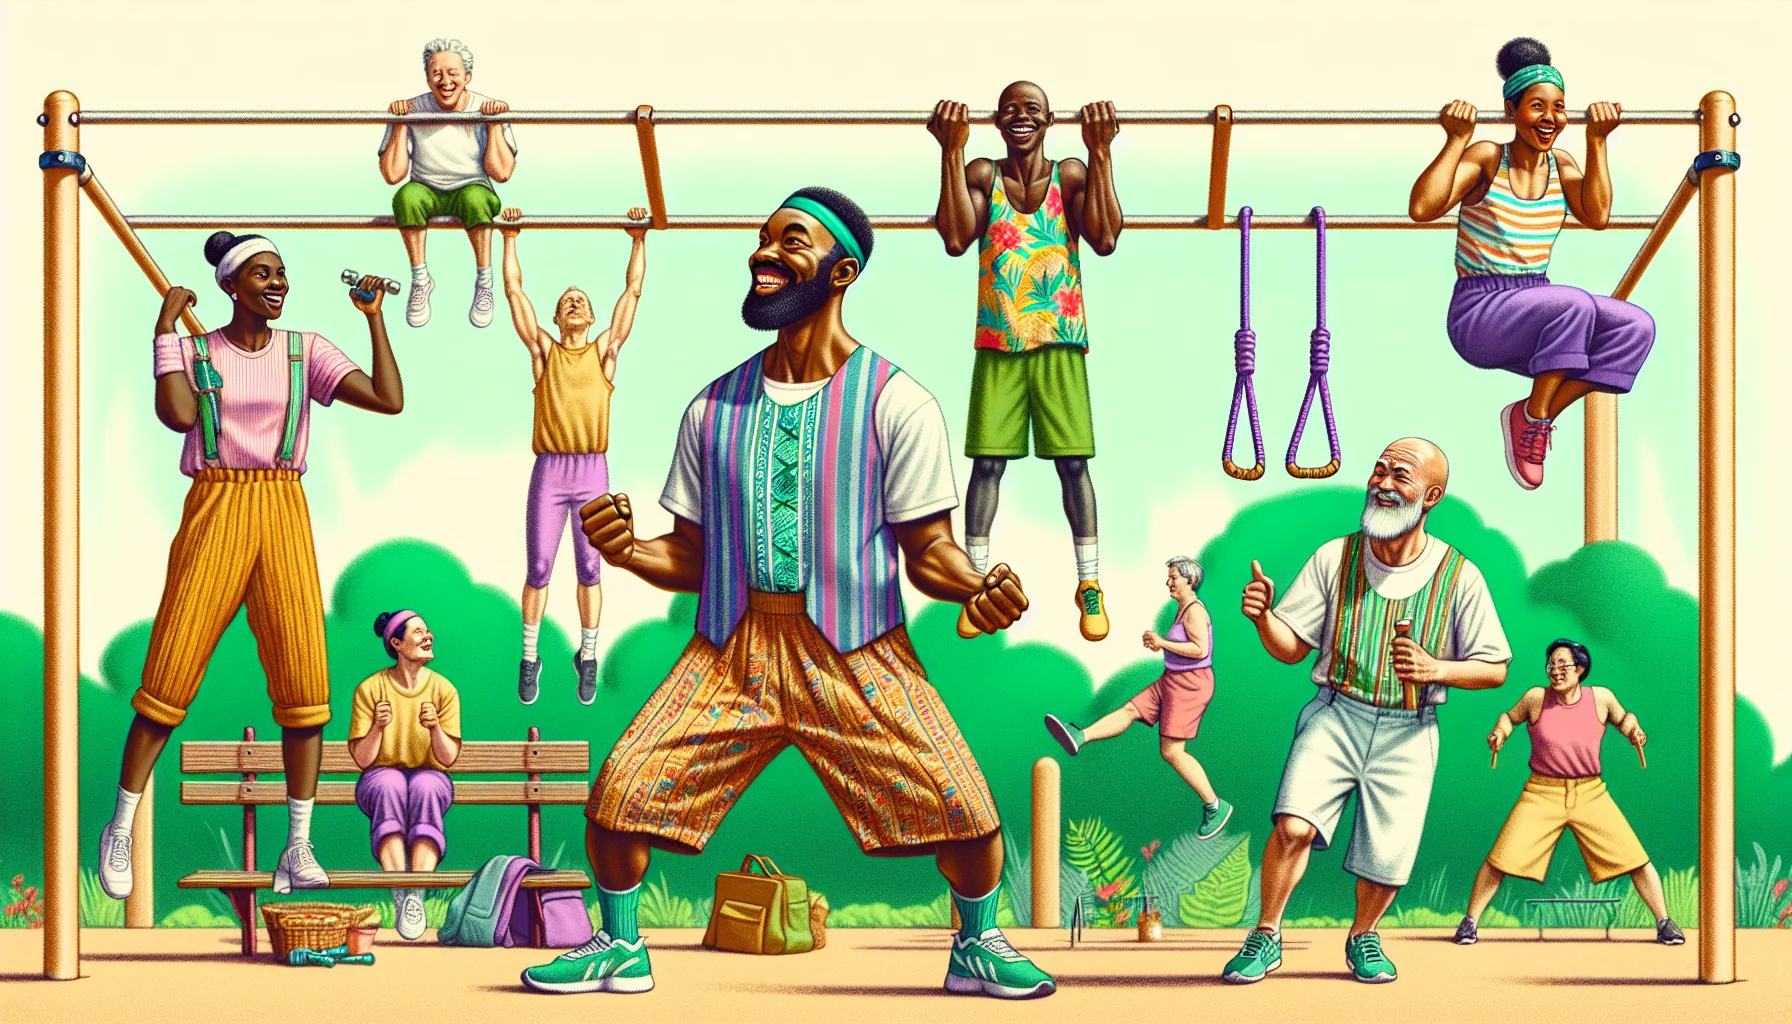 Create a humorous and captivating illustration that portrays a group of individuals of diverse descents and genders engaging in shoulder calisthenics exercises in an outdoor park. The scene could include an African lady, a Caucasian man, an Asian lady, and a Hispanic man all having a laughable moment while doing push-ups, handstands or pull-ups on the bars. Encapsulate the spirit of light-hearted fitness, with classic workout gears, such as sweatbands and shorts, and occasional mishaps, like tangled skipping ropes or misbalanced yoga poses, which create comic relief, promoting the idea of exercising fun.